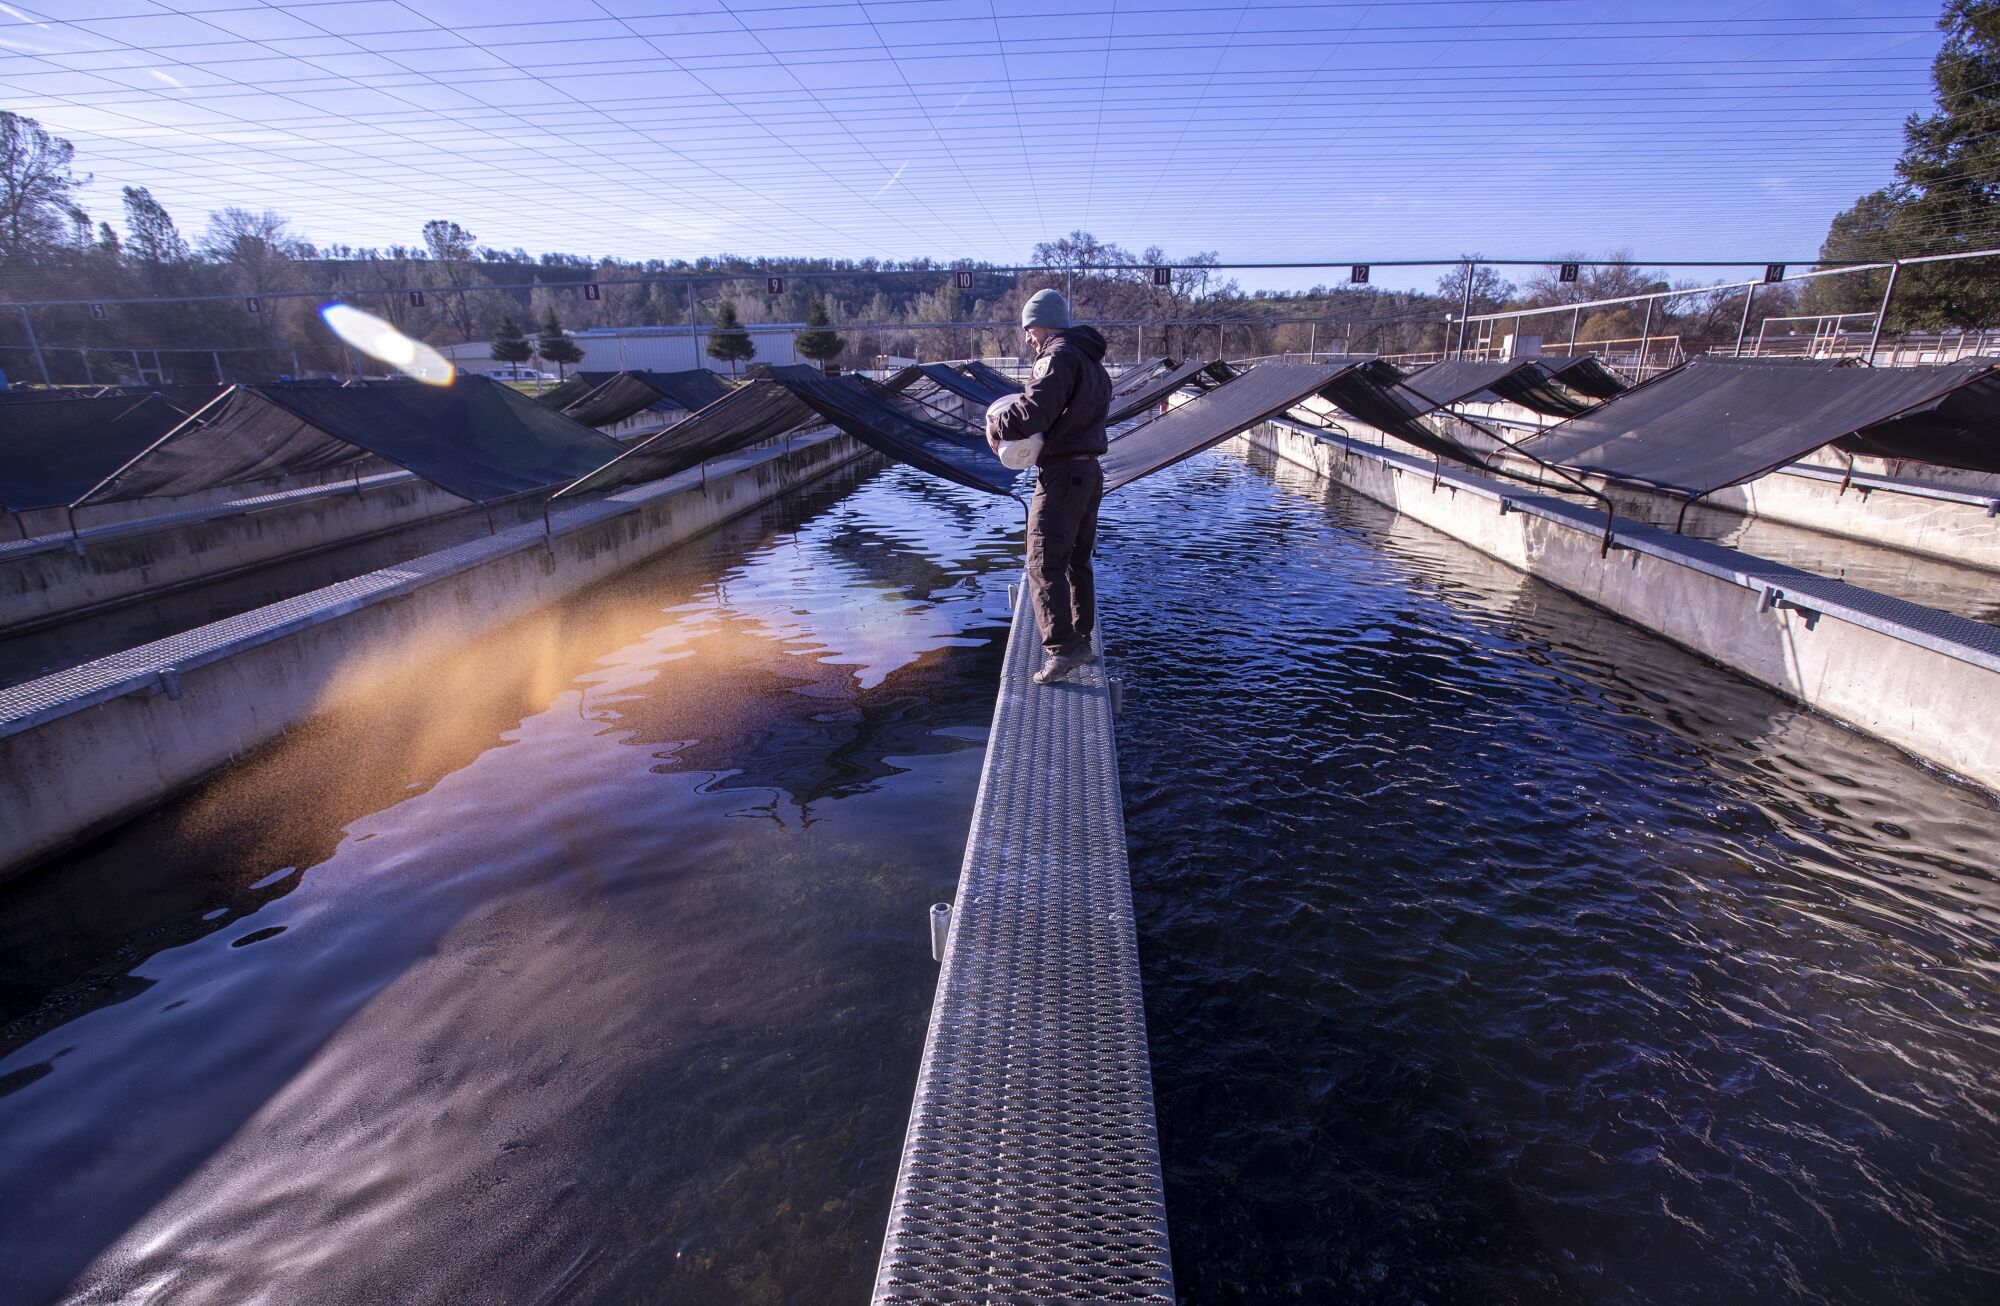 Jason Davis feeds fall-run Chinook salmon fry in a tank at the Coleman National Fish Hatchery in Anderson, Calif.